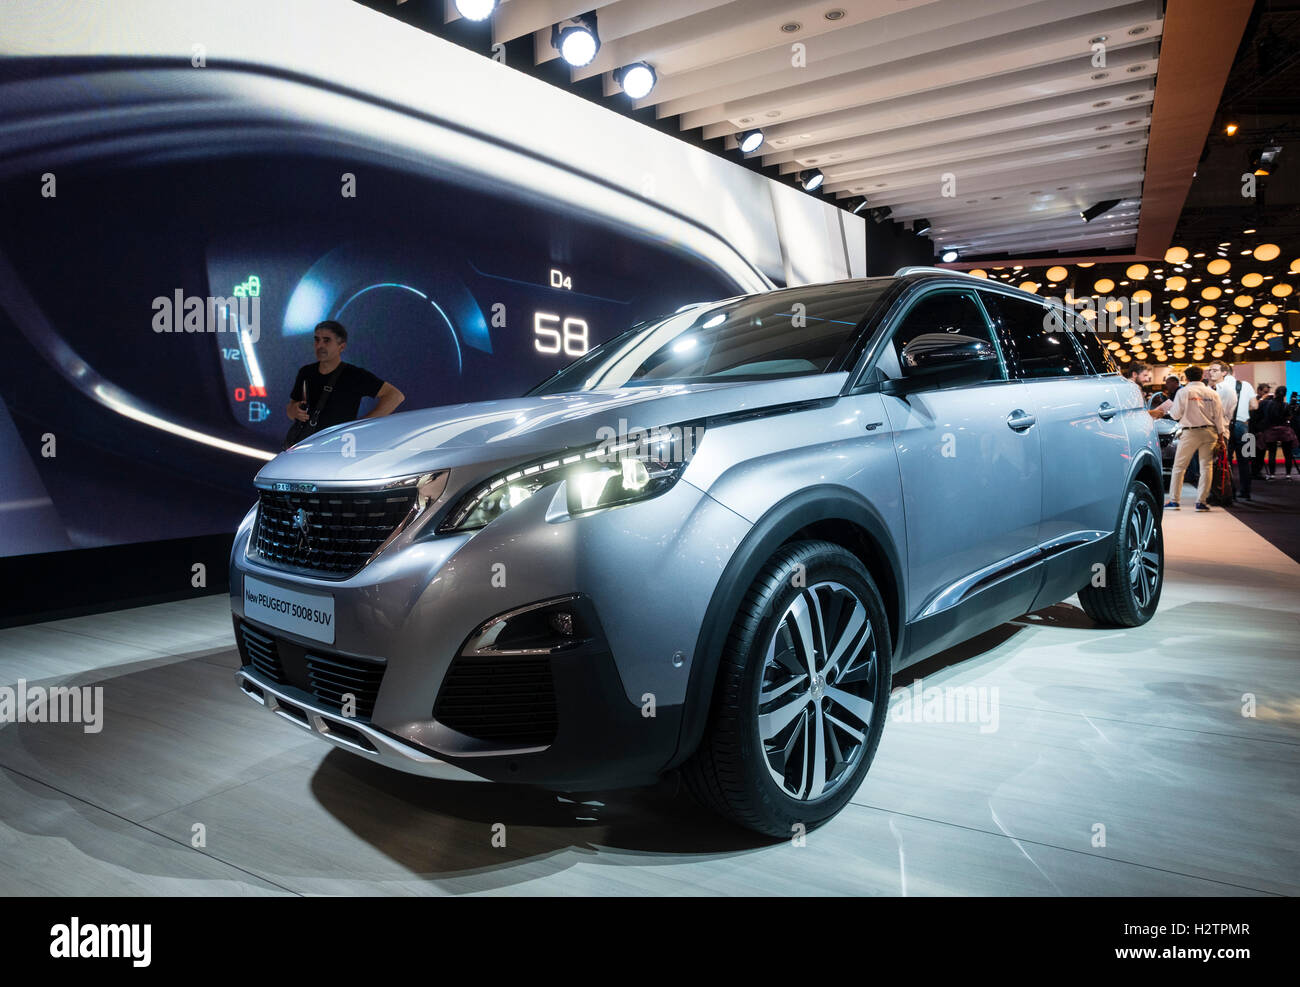 New Peugeot 5008 SUV at world premiere launch at Paris Motor Show 2016 Stock Photo